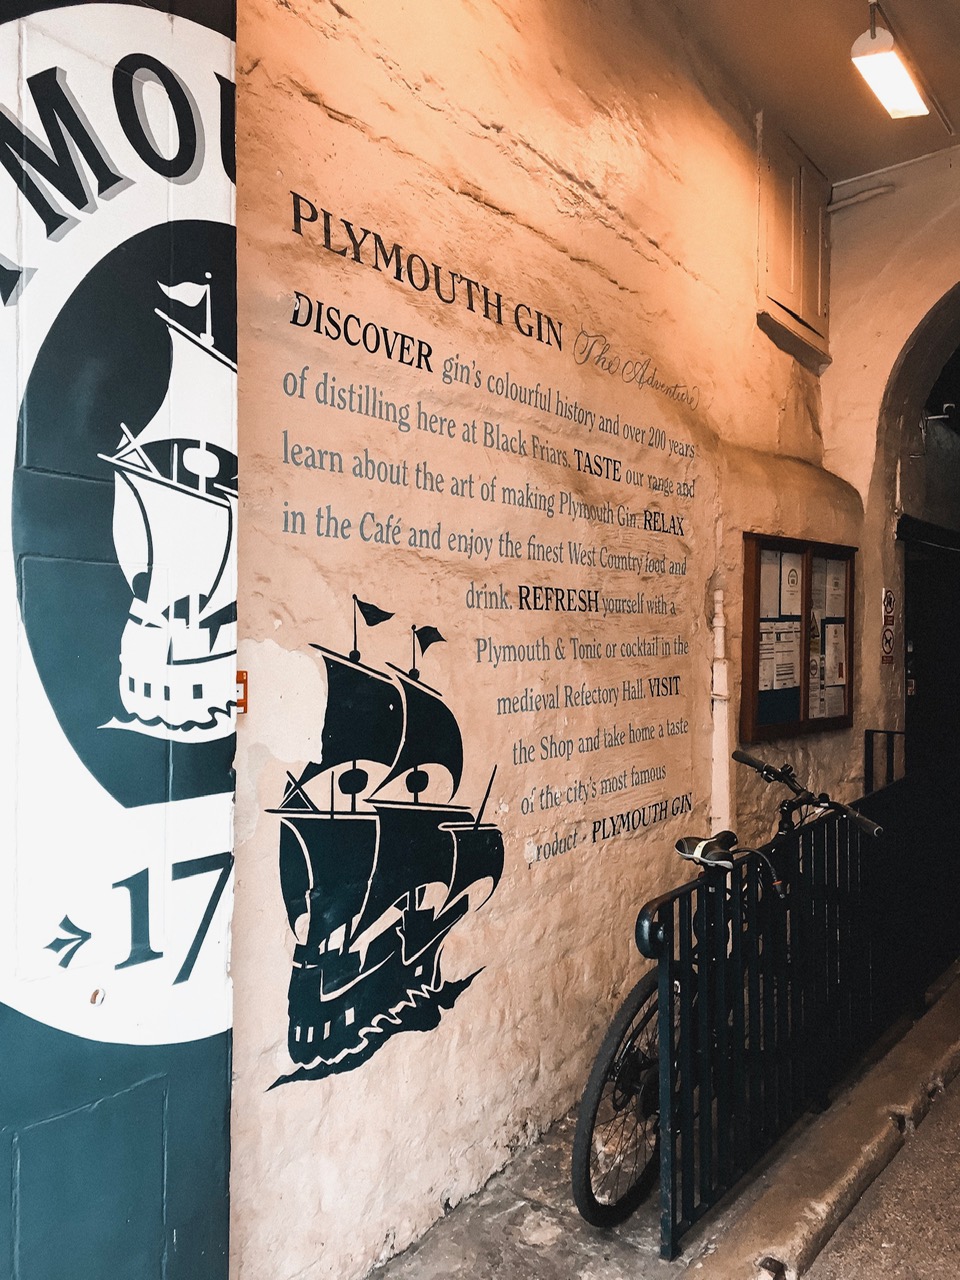 Day trip to Plymouth gin distillery tour